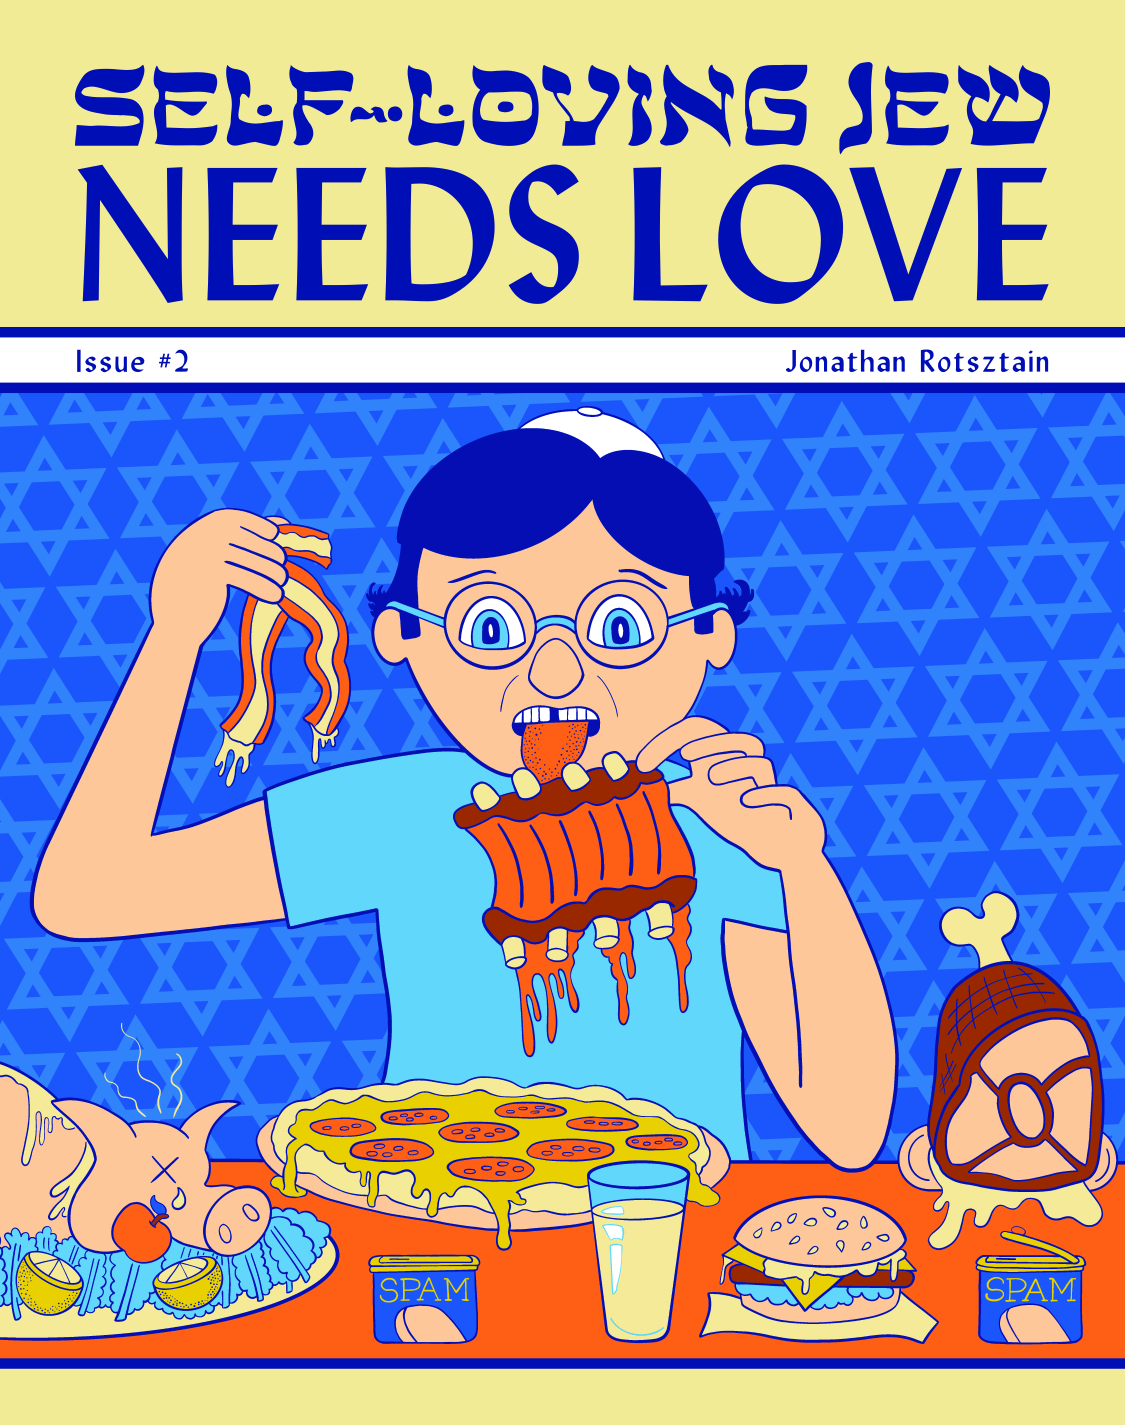 Self-Loving Jew Needs Love Issue Number 2. Illustration of young Jonathan wearing a kippah seated at a table with many treif (non-Kosher) foods including pork, ham bacon, and pepporini pizza with Magen Davids in the background.